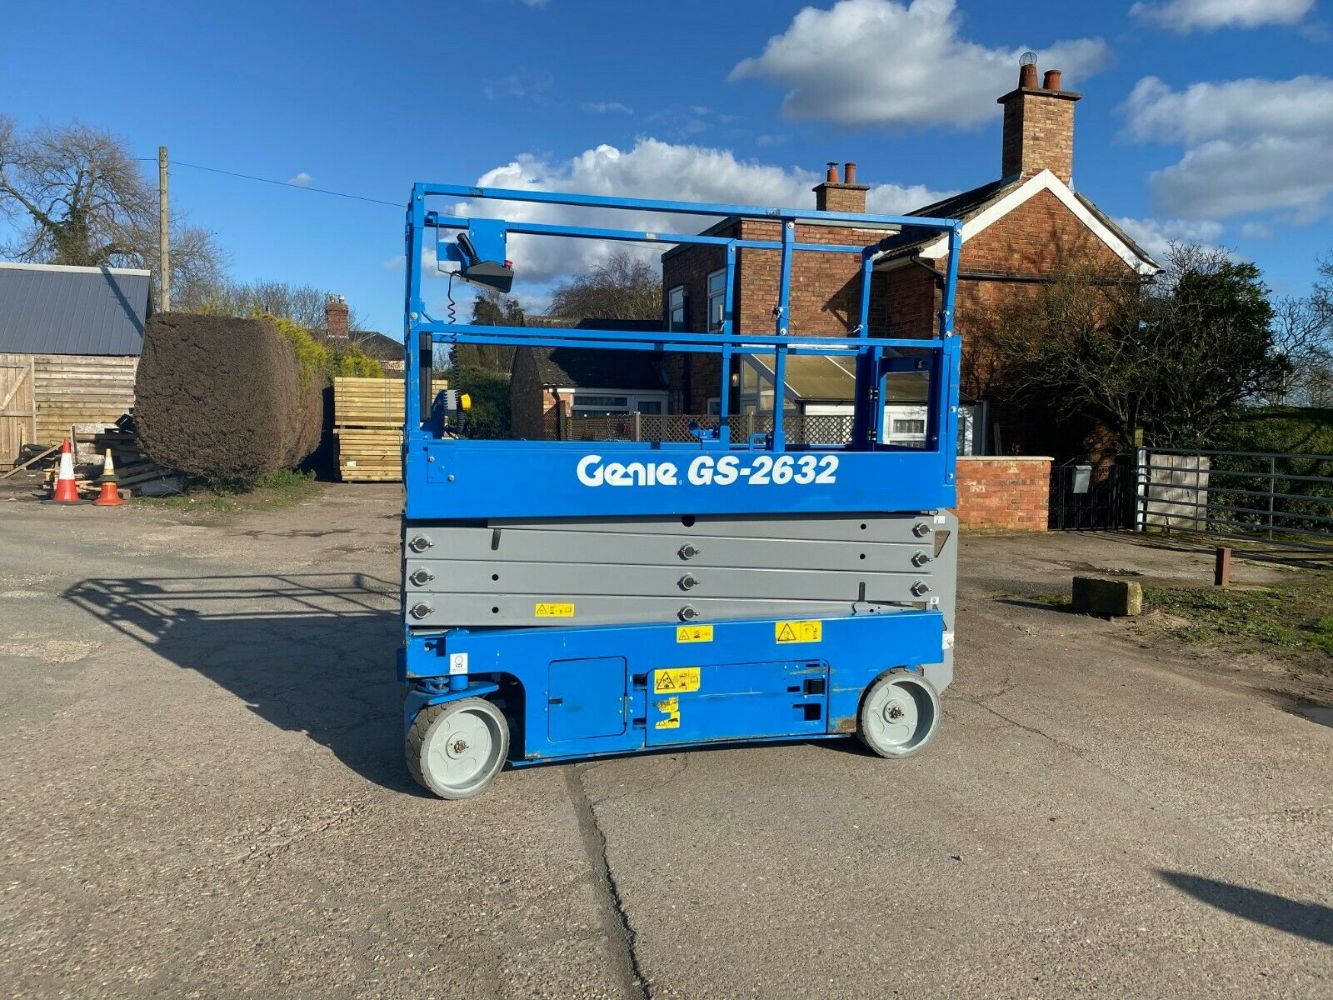 GENIE ACCESS PLATFORM SCISSOR LIFTS 9.8M, JCB 8014 MINI DIGGER, 2020 DIGGERS, WOOD CHIPPERS, MOWERS, FORKLIFTS, NEW HOLLAND ENDS MONDAY FROM 7PM